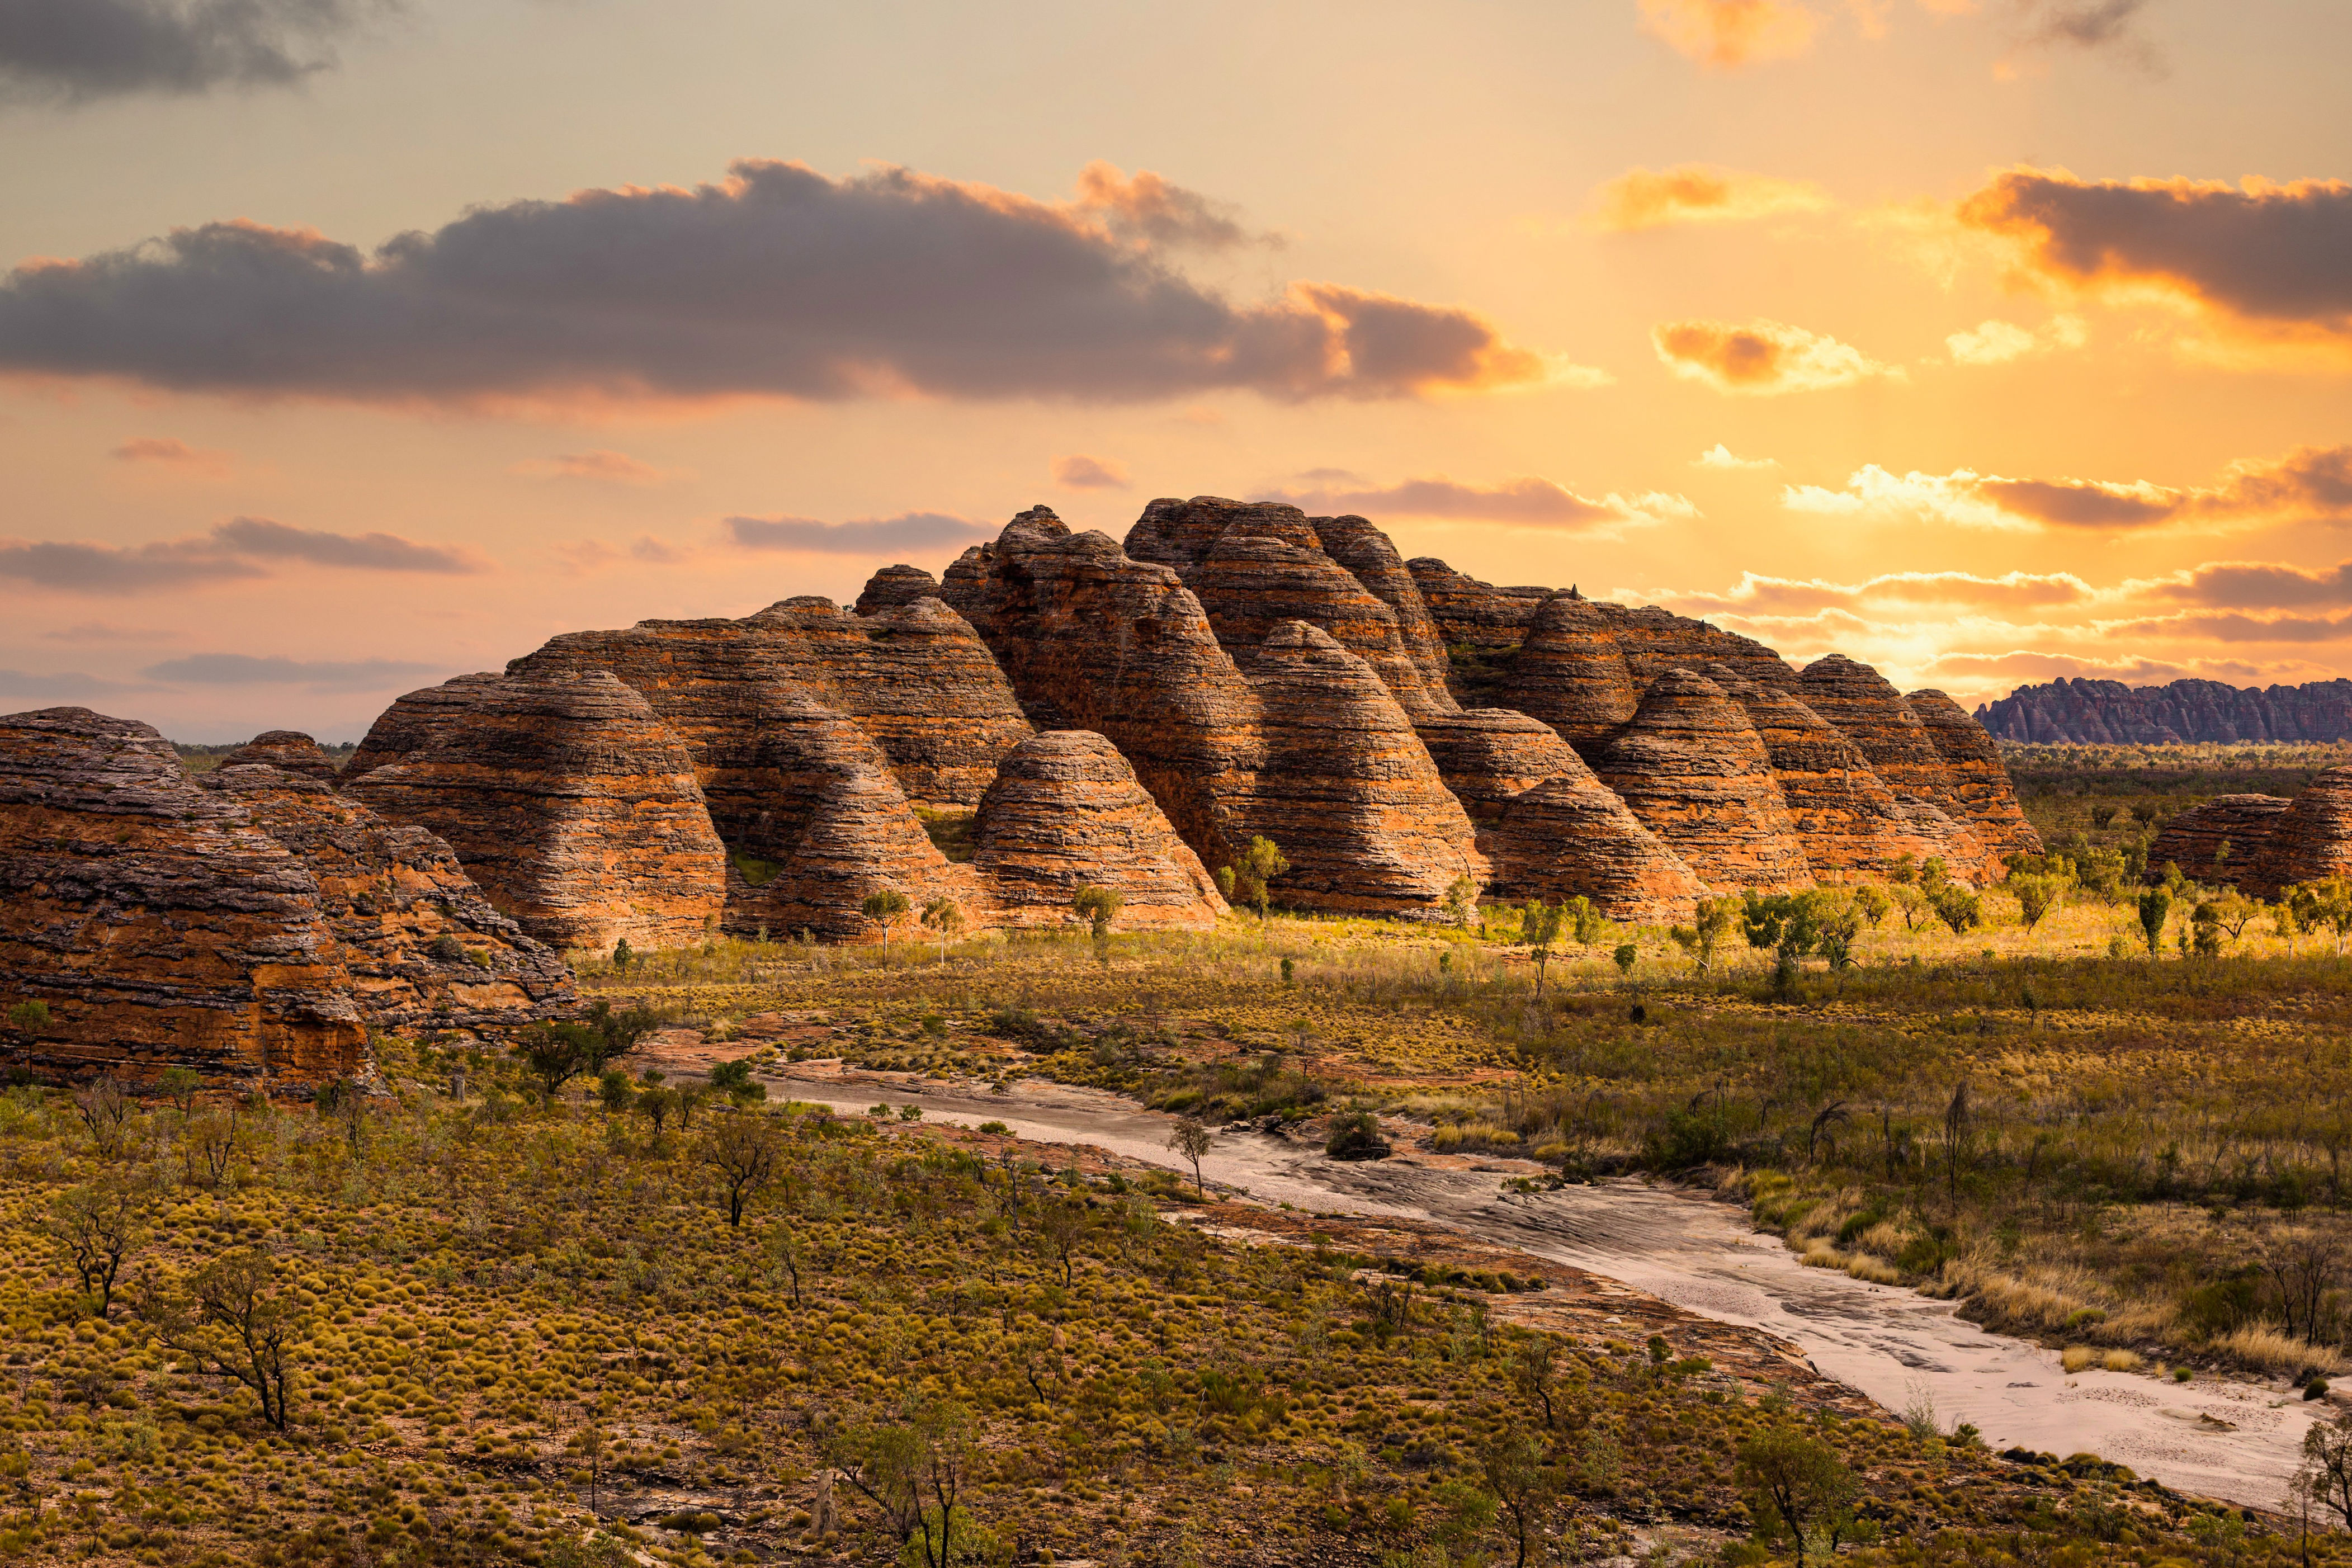 <p>There’s a reason we dubbed Western Australia’s remote Kimberley region one of <a href="https://www.cntraveler.com/story/best-places-to-go-in-2024?mbid=synd_msn_rss&utm_source=msn&utm_medium=syndication">the best places to visit in 2024</a>: This truly wild frontier is a treasure trove of ancient rock formations, towering waterfalls, white sand beaches, and striking blue waters. It’s also historically difficult to reach and explore, but that all changed this year with an influx of Kimberley-focused cruise lines. <a href="https://www.seabourn.com/en/us/cruise-destinations/kimberley">Seabourn</a> now offers expedition cruises to the region, Ponant and Silversea are soon deploying new ships there, and Scenic’s <em>Eclipse II</em> has 11-day sailings on the lineup <a href="https://www.scenicusa.com/tours/101o-stusa/101o-stusa-2023-bme-drw">starting in June</a>—ones with onboard helicopters for further exploration, no less.</p> <p>Tourism is heating up in Broome as well. Leading tour operators have joined forces to launch <a href="https://experience.welcometocountry.com/products/broomes-ultimate-aboriginal-culture-expedition">Broome’s Ultimate Aboriginal Culture Expedition</a>, a three-day tour dedicated to immersing travelers in First Nations experiences in and around the coastal town. Bookings are available from May to August and include activities like cruises in Roebuck Bay, storytelling and dance performances, cultural walks, and more.</p><p>Sign up to receive the latest news, expert tips, and inspiration on all things travel</p><a href="https://www.cntraveler.com/newsletter/the-daily?sourceCode=msnsend">Inspire Me</a>